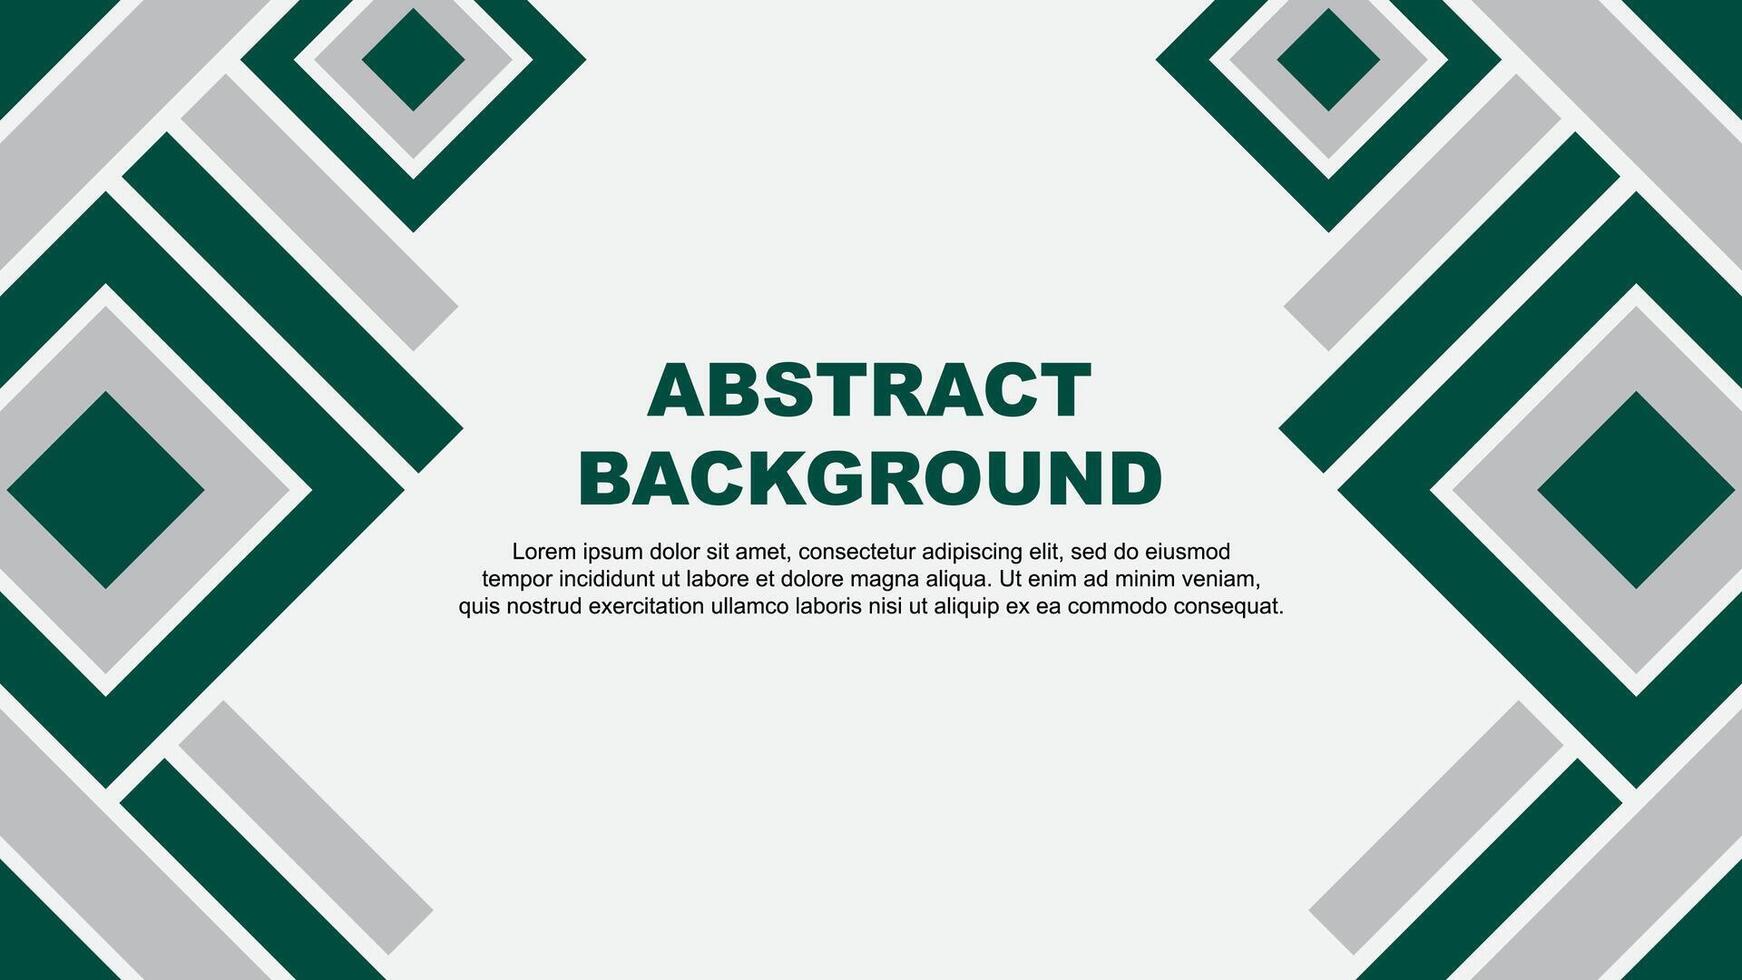 Abstract Teal Green Background Design Template. Banner Wallpaper Vector Illustration. Teal Green